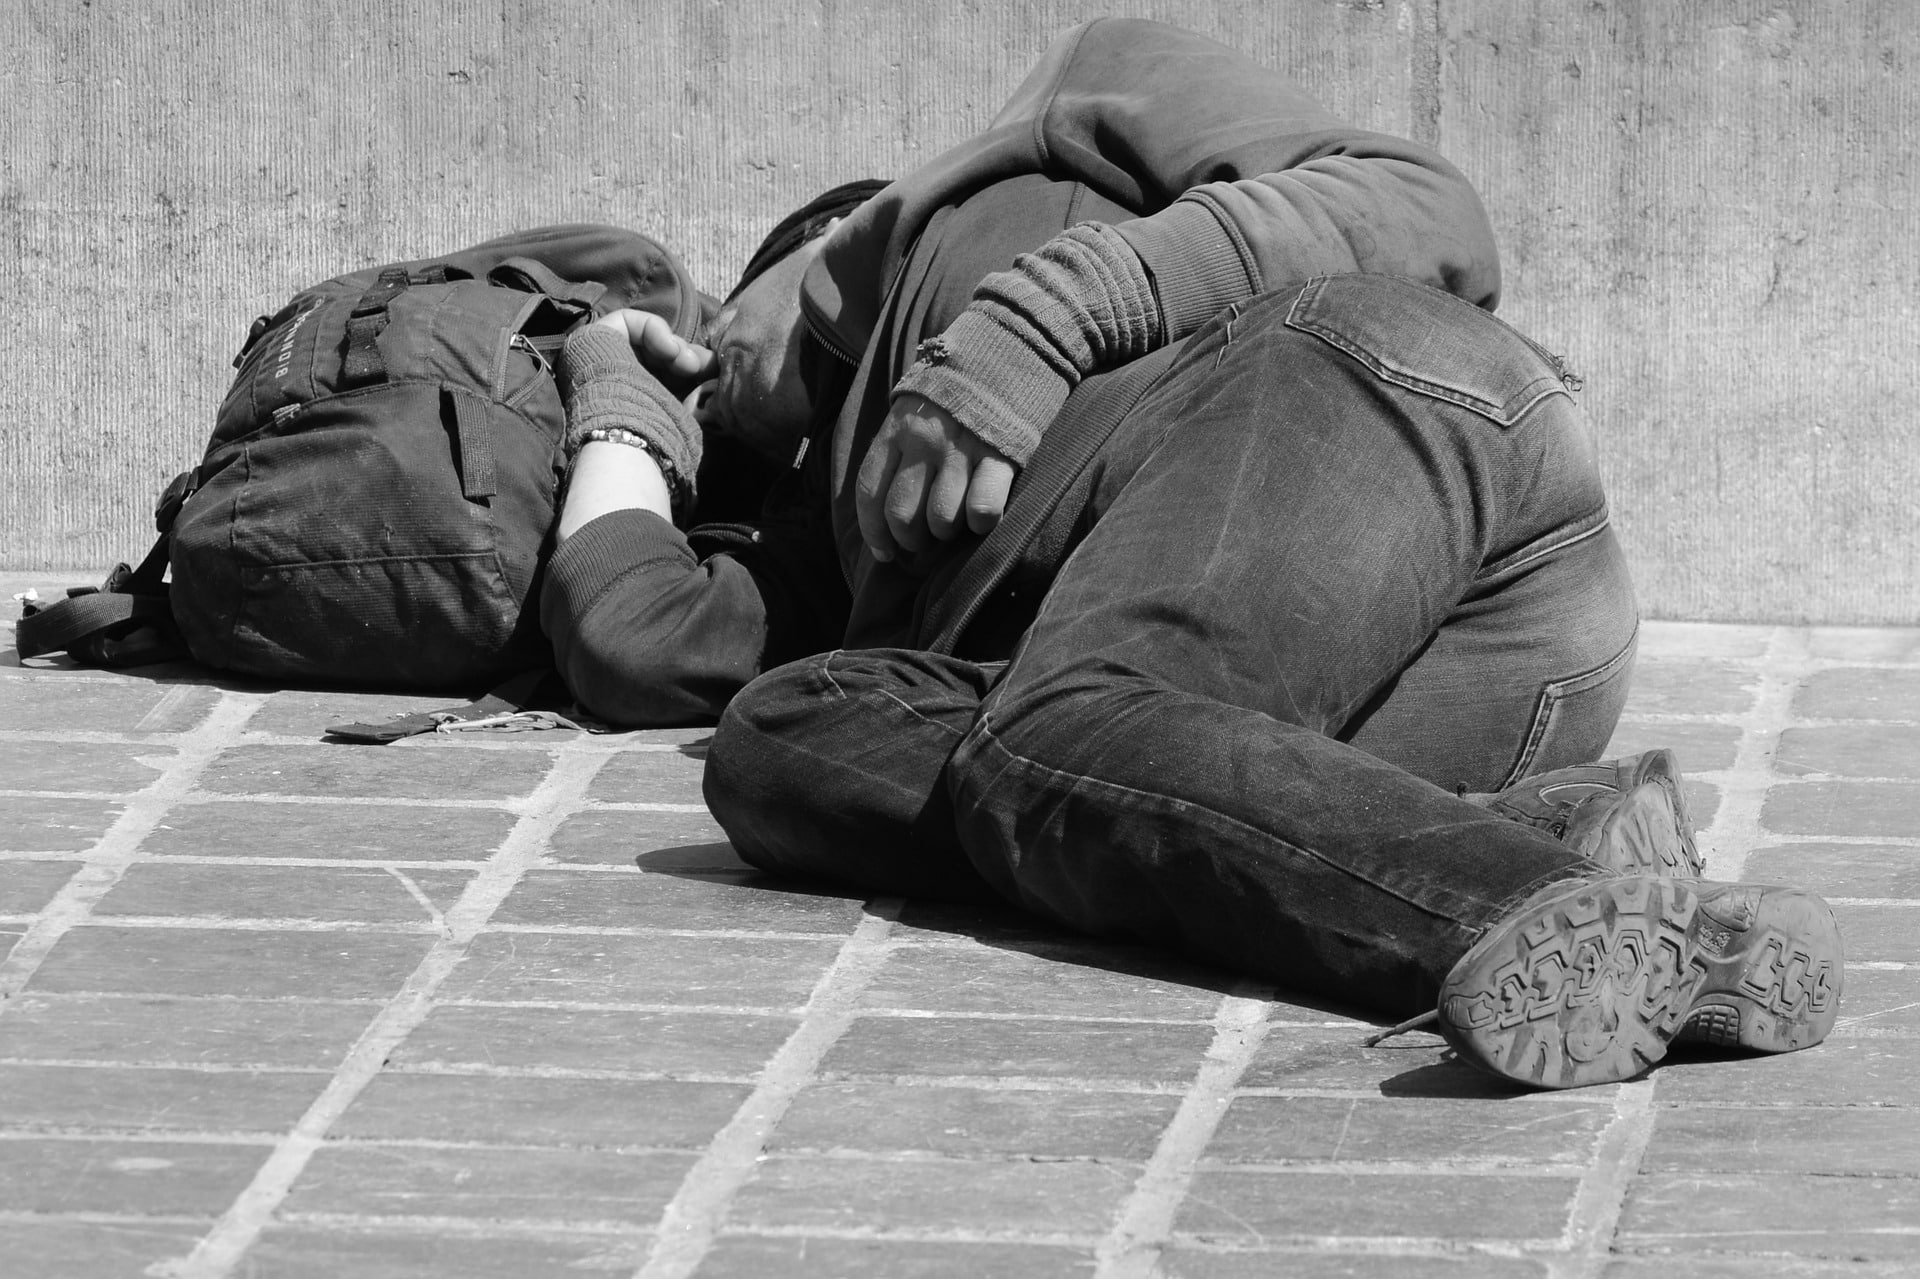 Homeless person sleeping next to a backpack